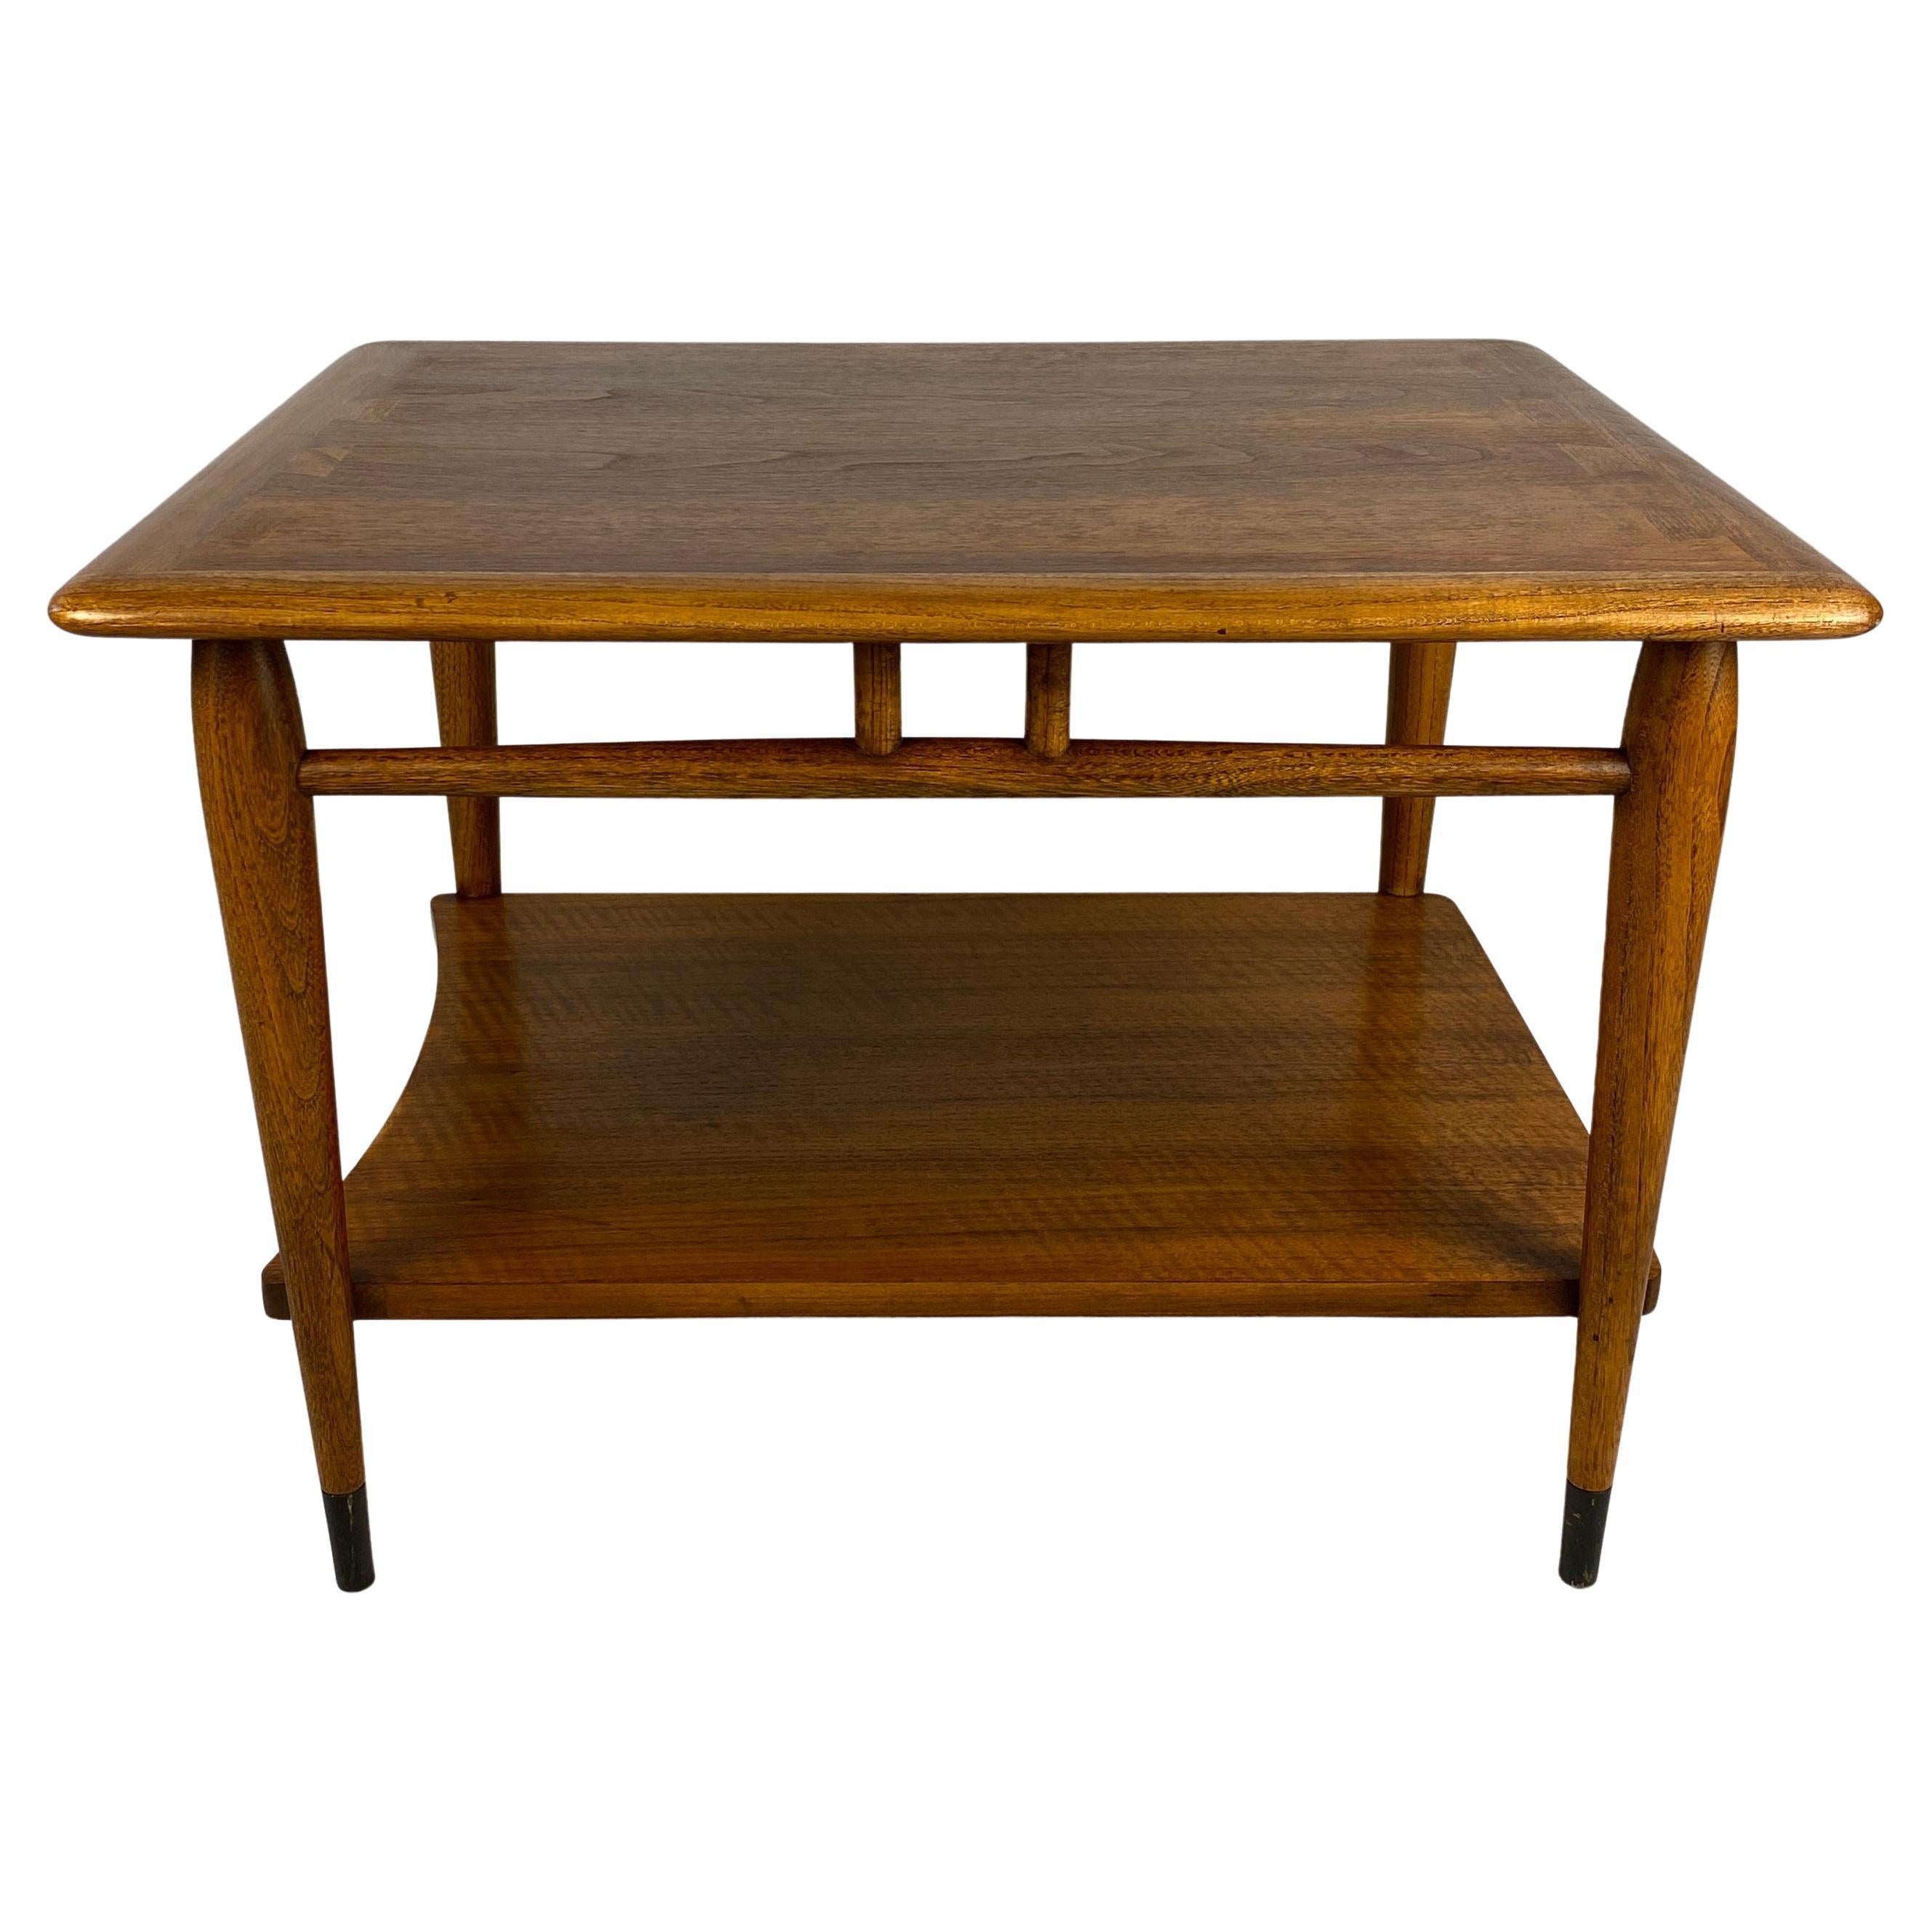 Scandinavian Style Wooden Coffee Table or End Table with Bottom Shelf For Sale